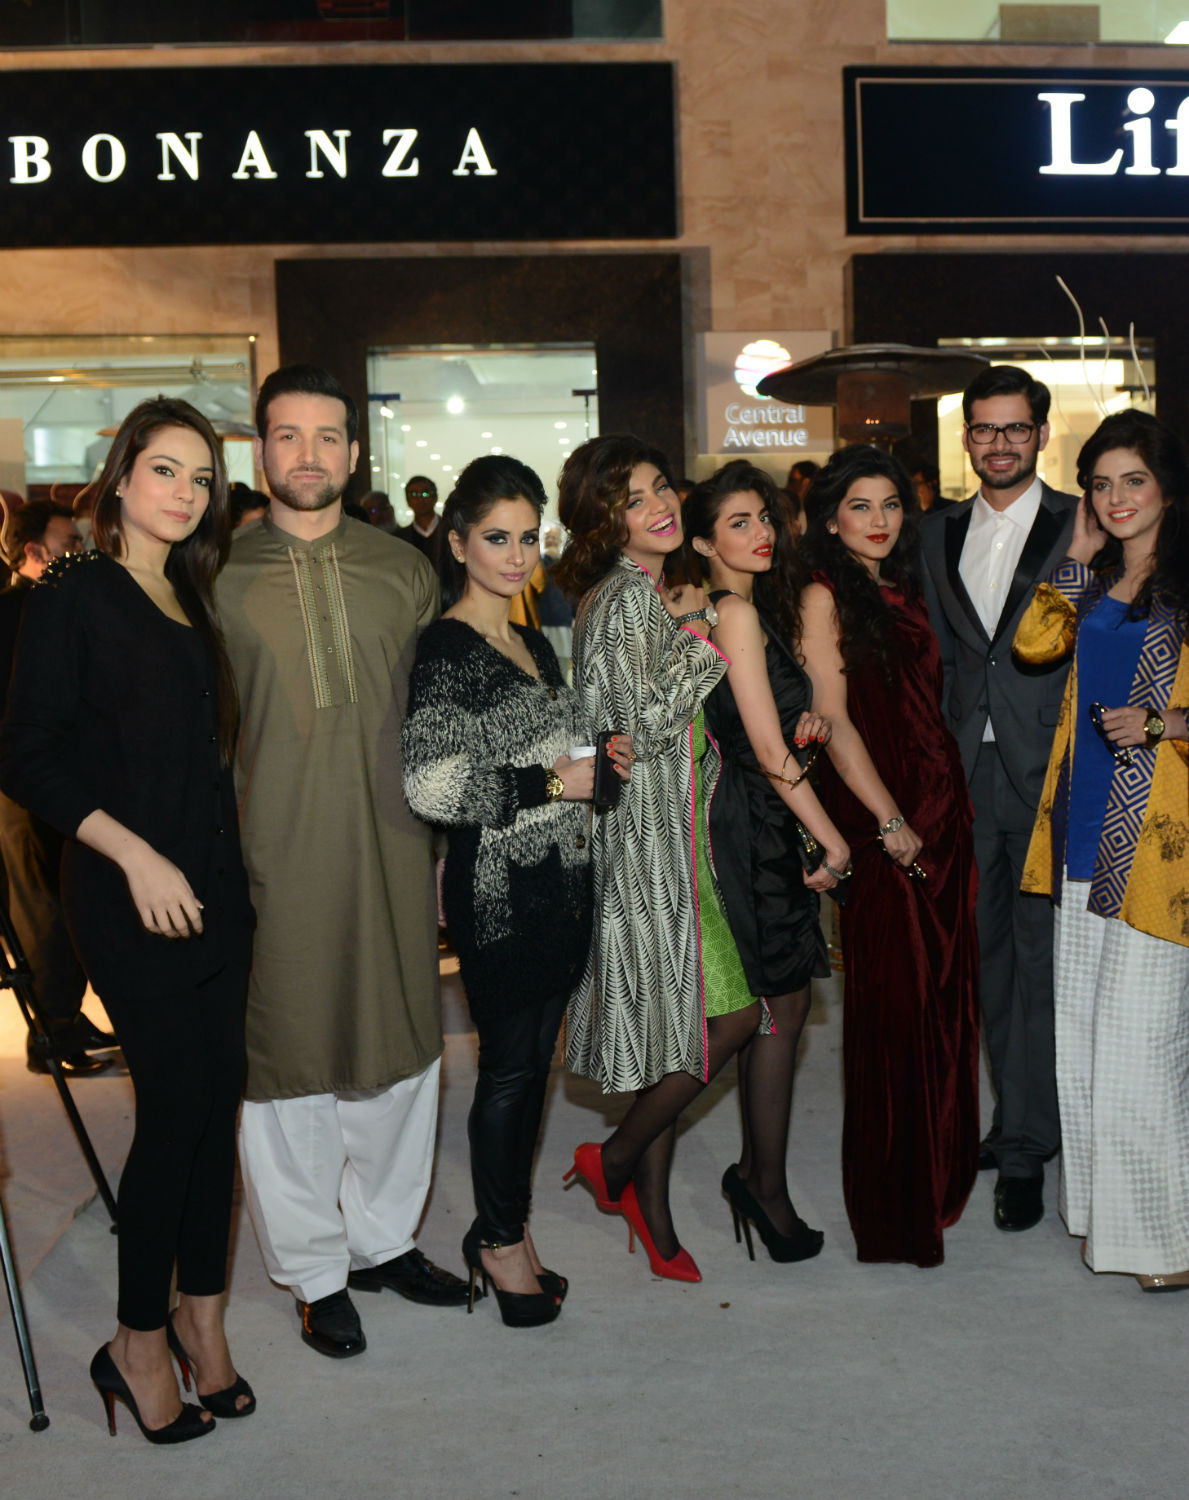 Bonanza, English Boot House and LifeStyle Collection provide Lahore a “Central Avenue” for all their diverse fashion needs